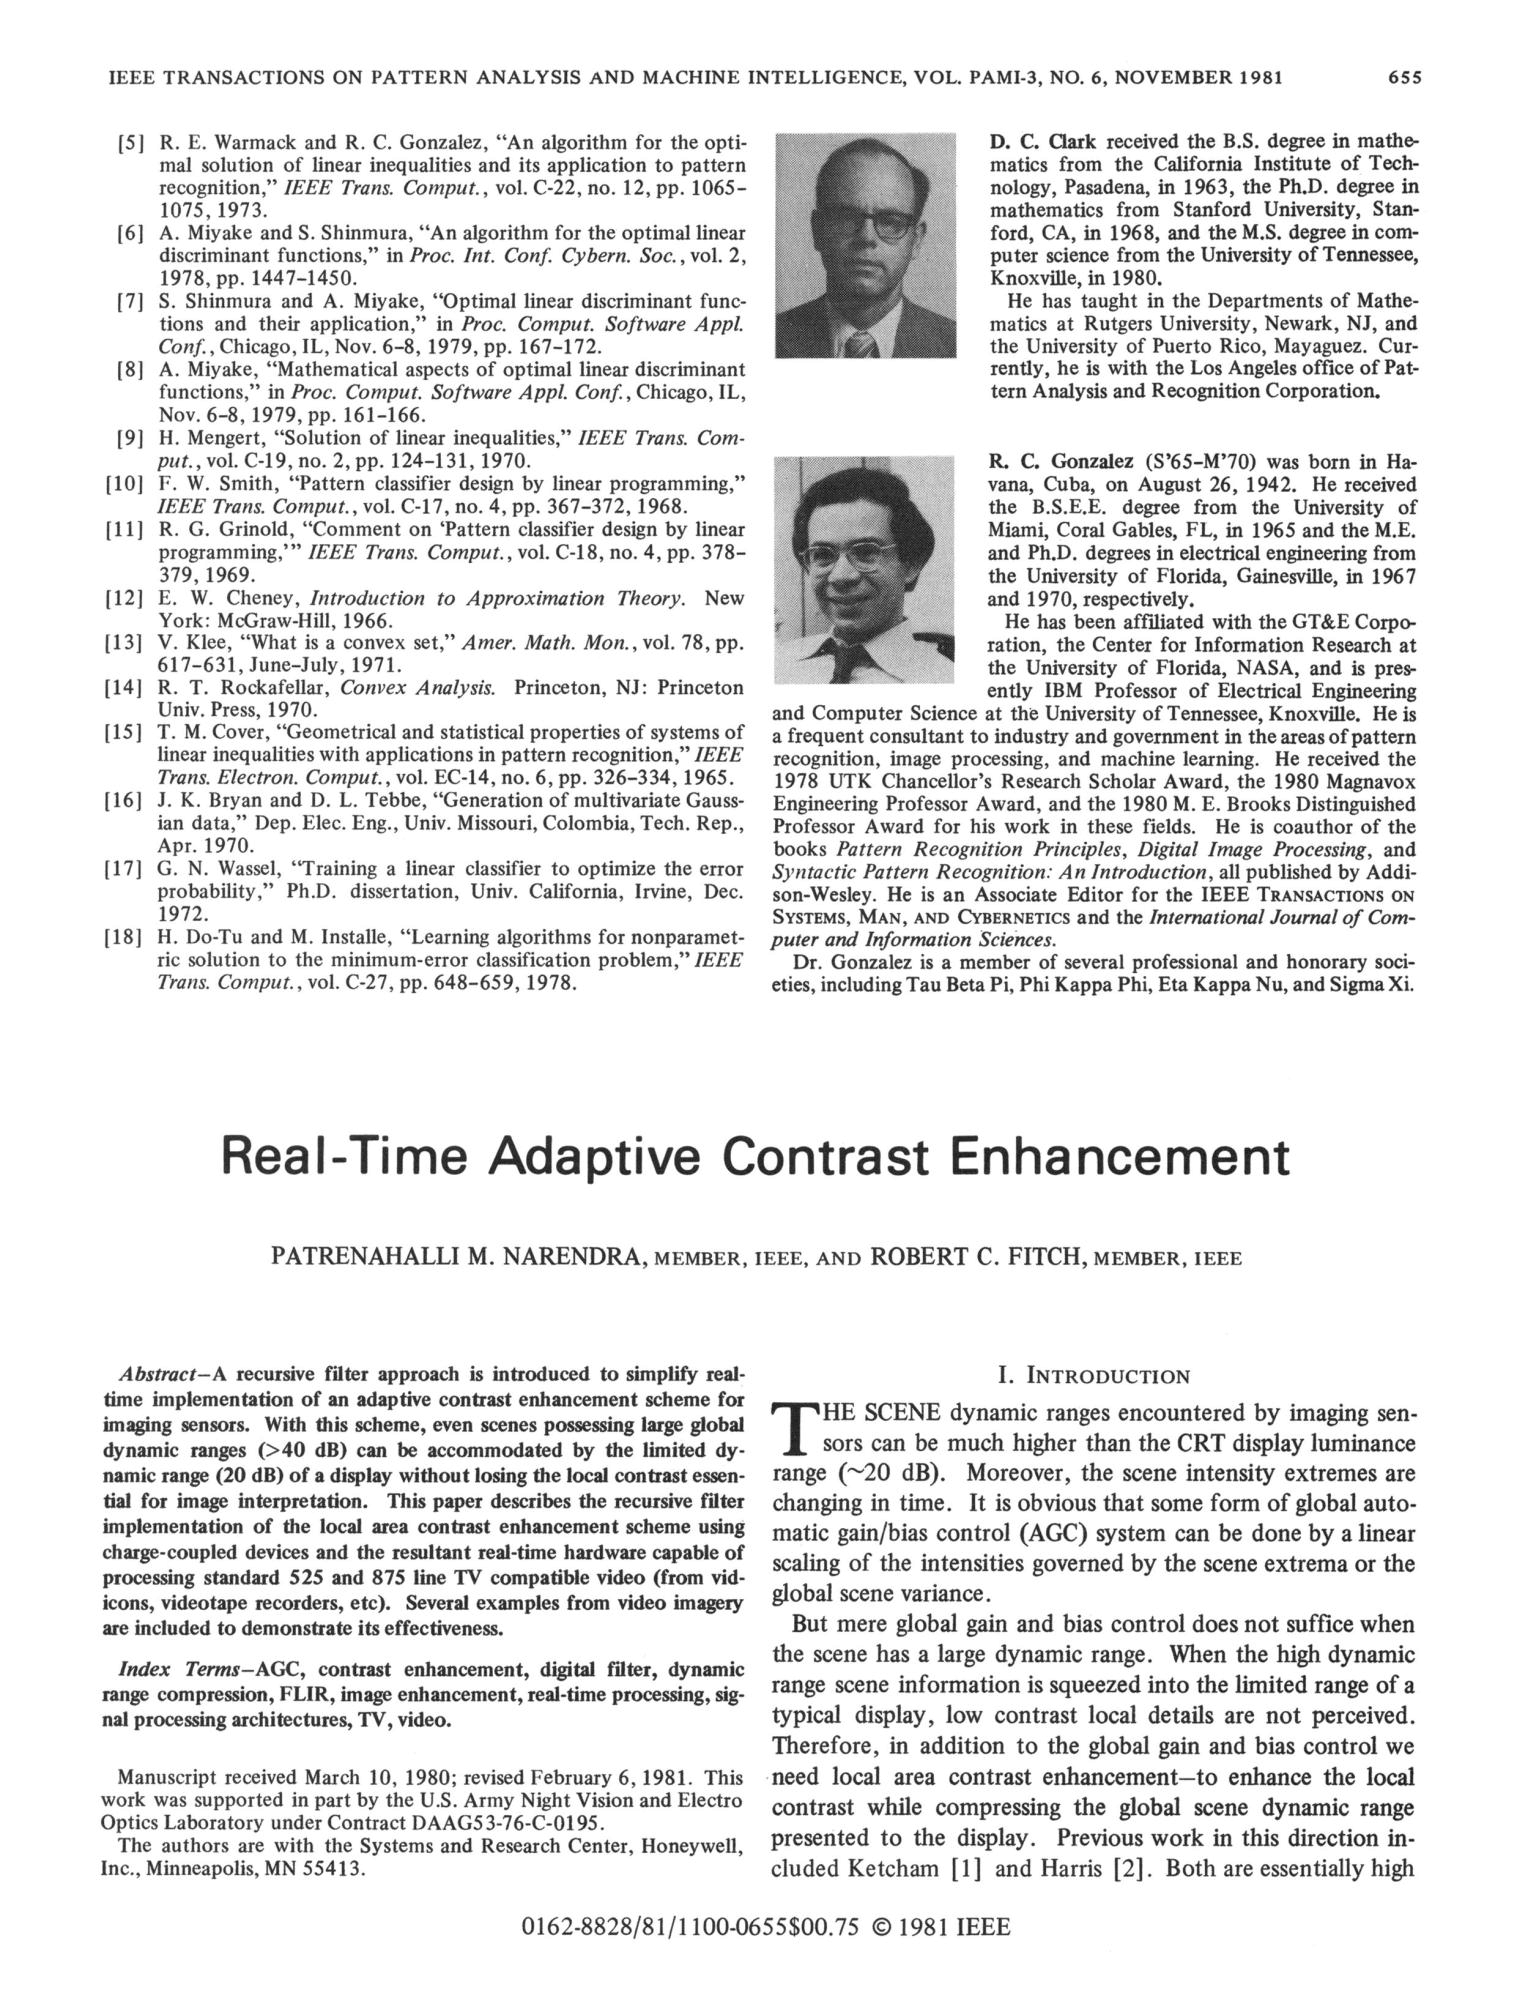 1.Real-Time Adaptive Contrast Enhancement